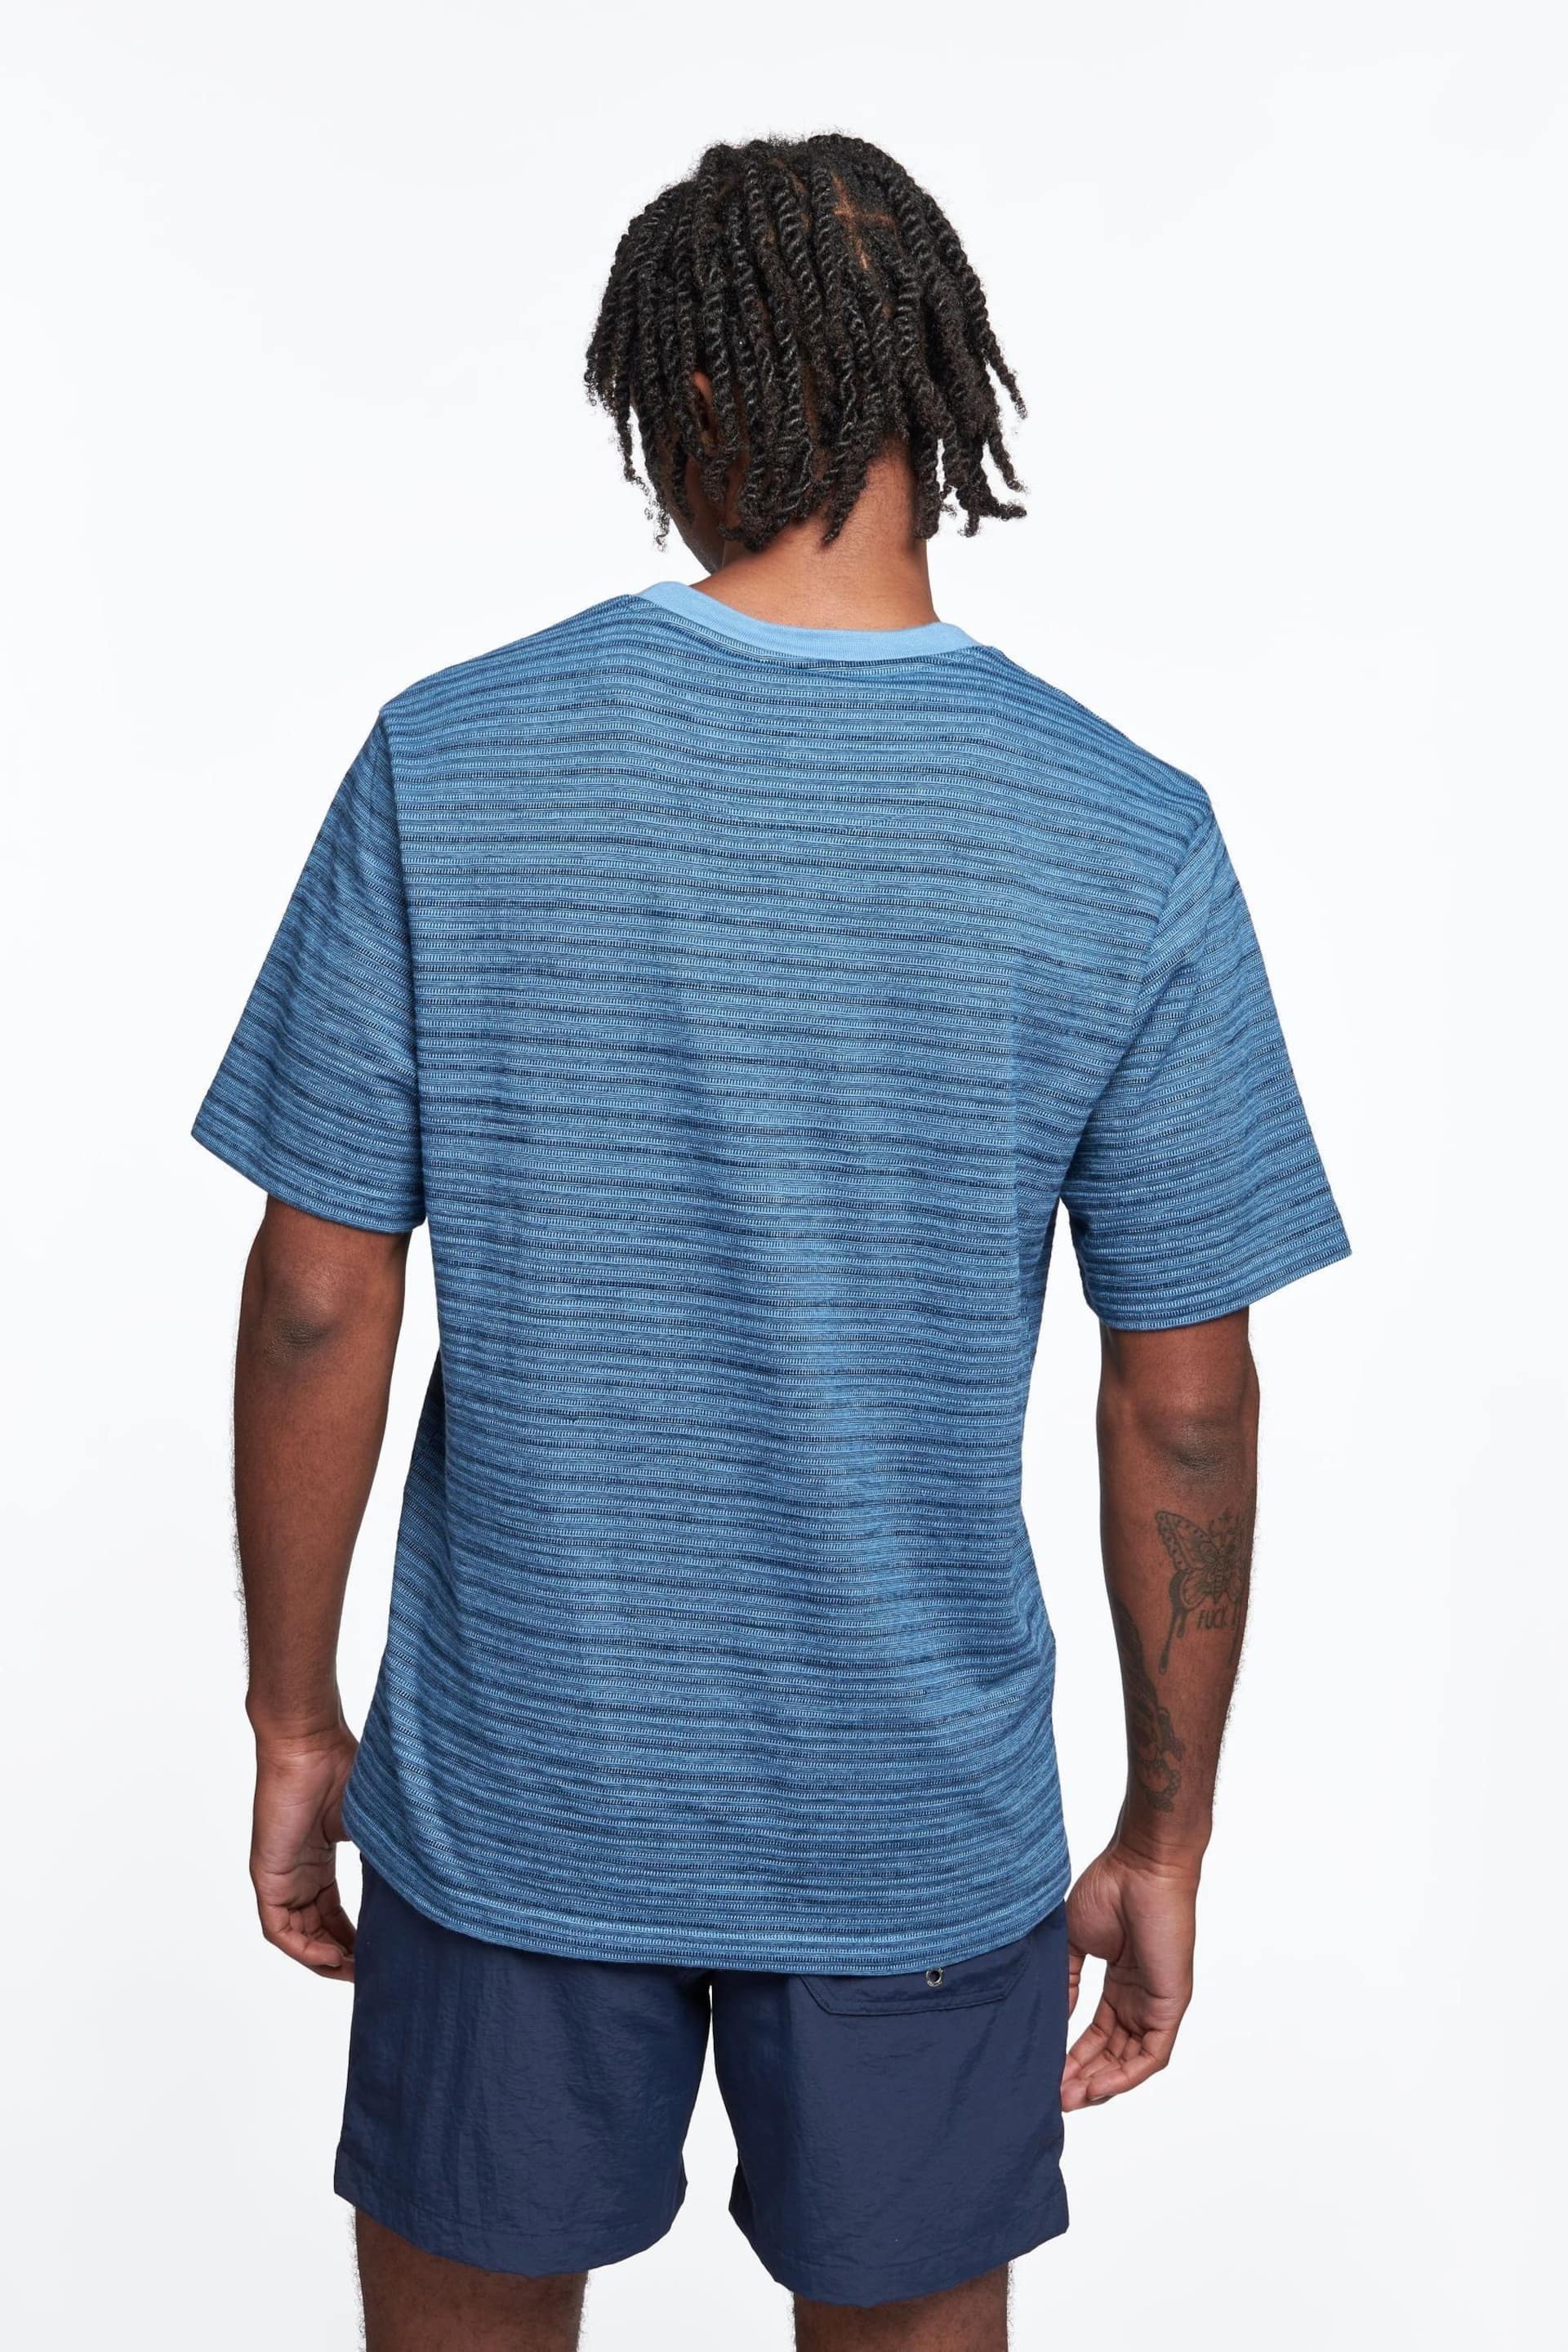 Penfield Blue Textured Striped T-Shirt - Image 2 of 5